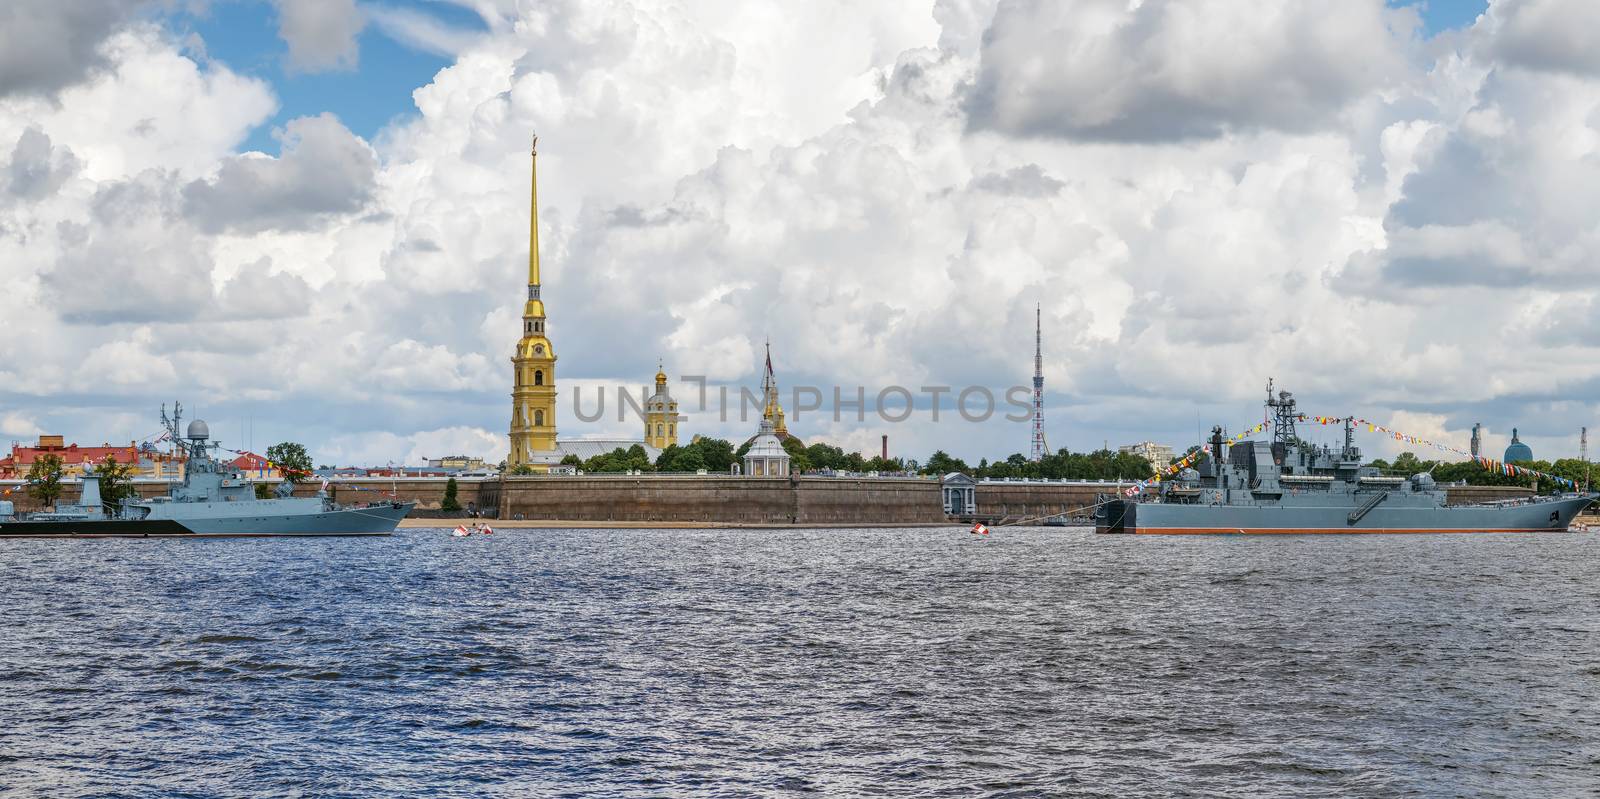 Peter and Paul Fortress, Saint Petersburg, Russia by borisb17